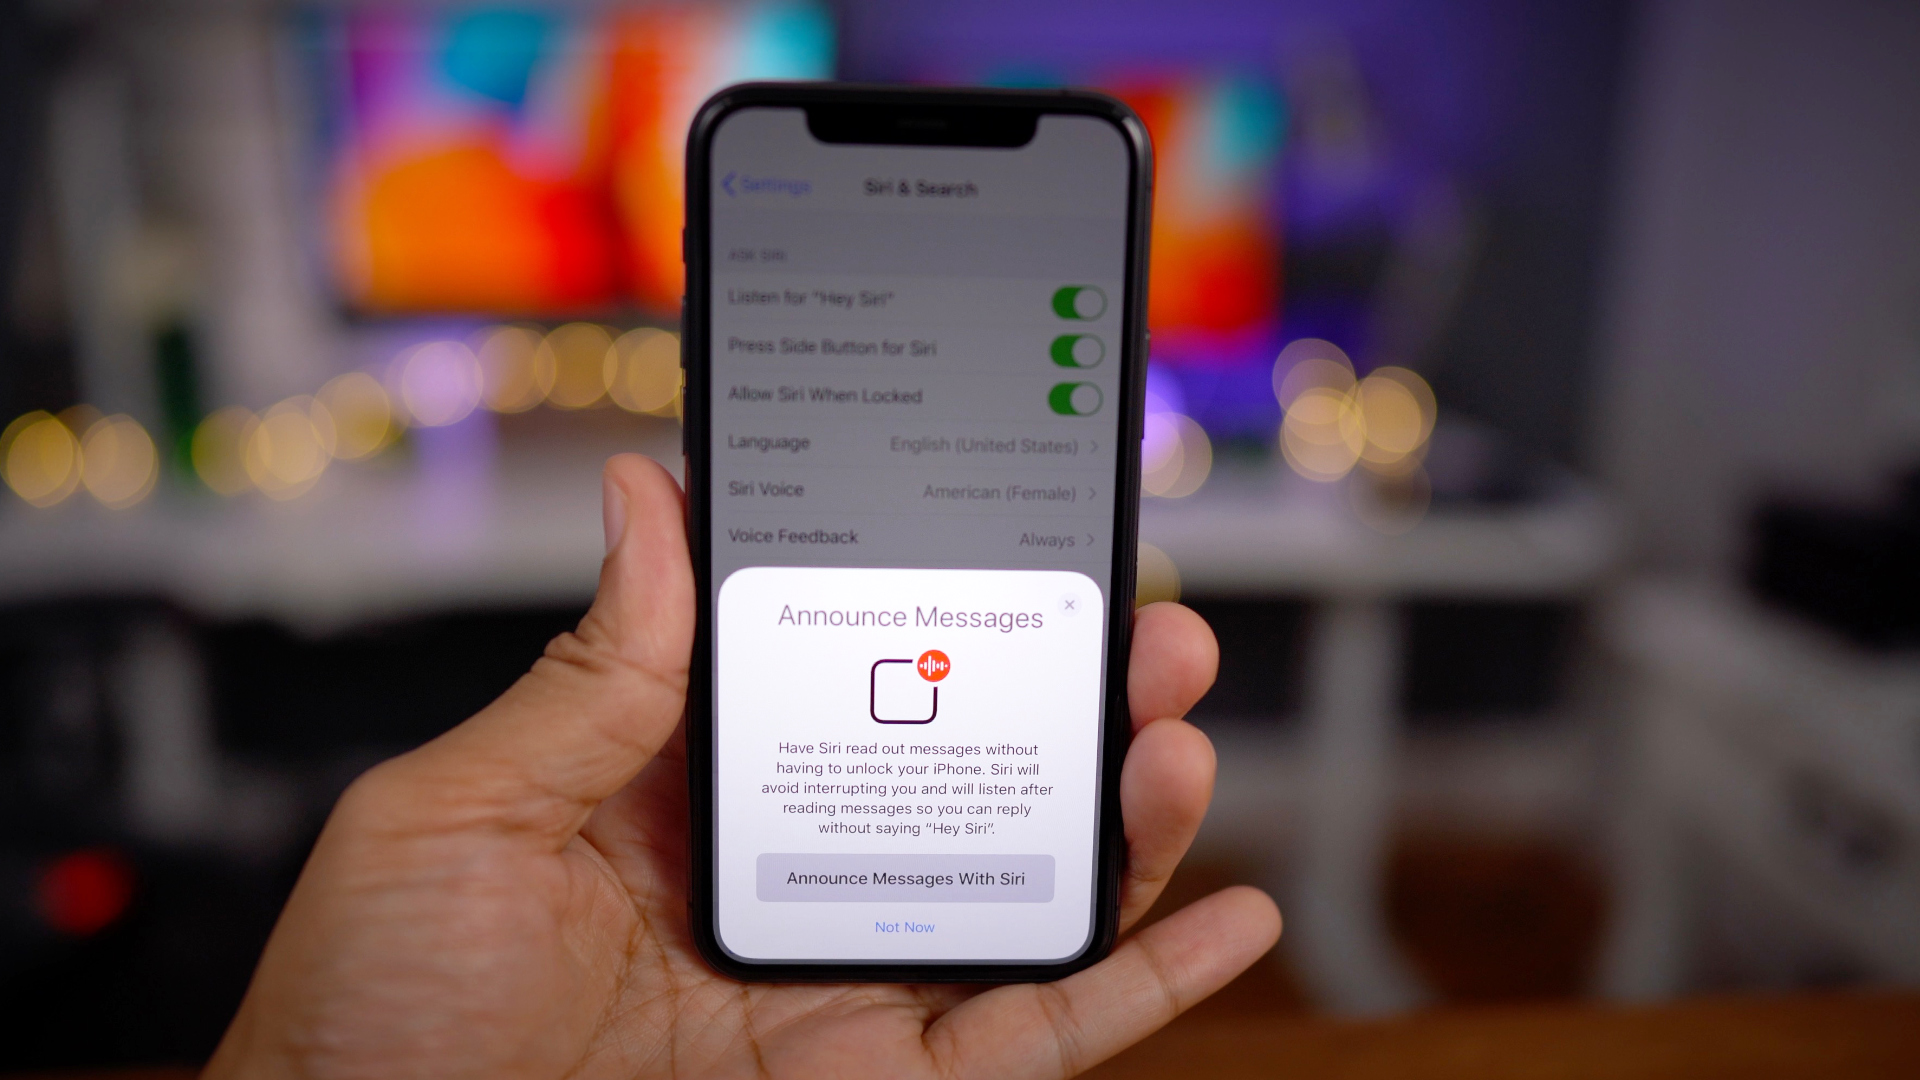 iOS-13-Changes-and-Features-9to5Mac